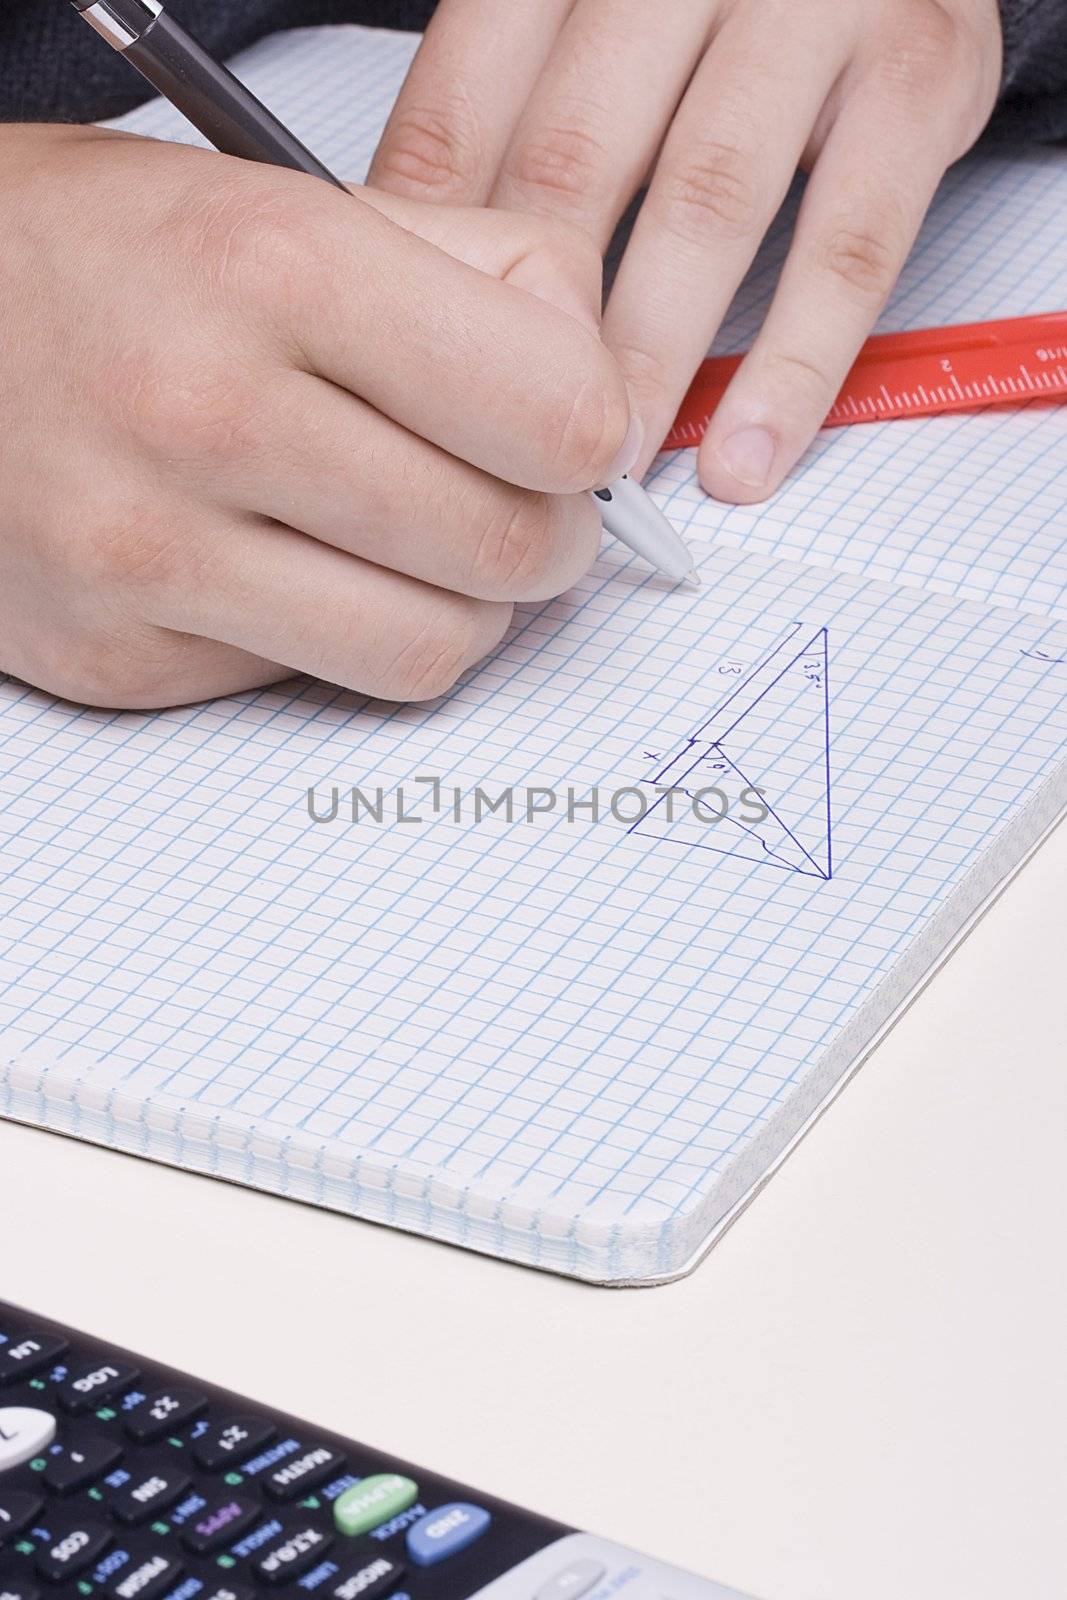 Student doing geometry problem in a notebook.